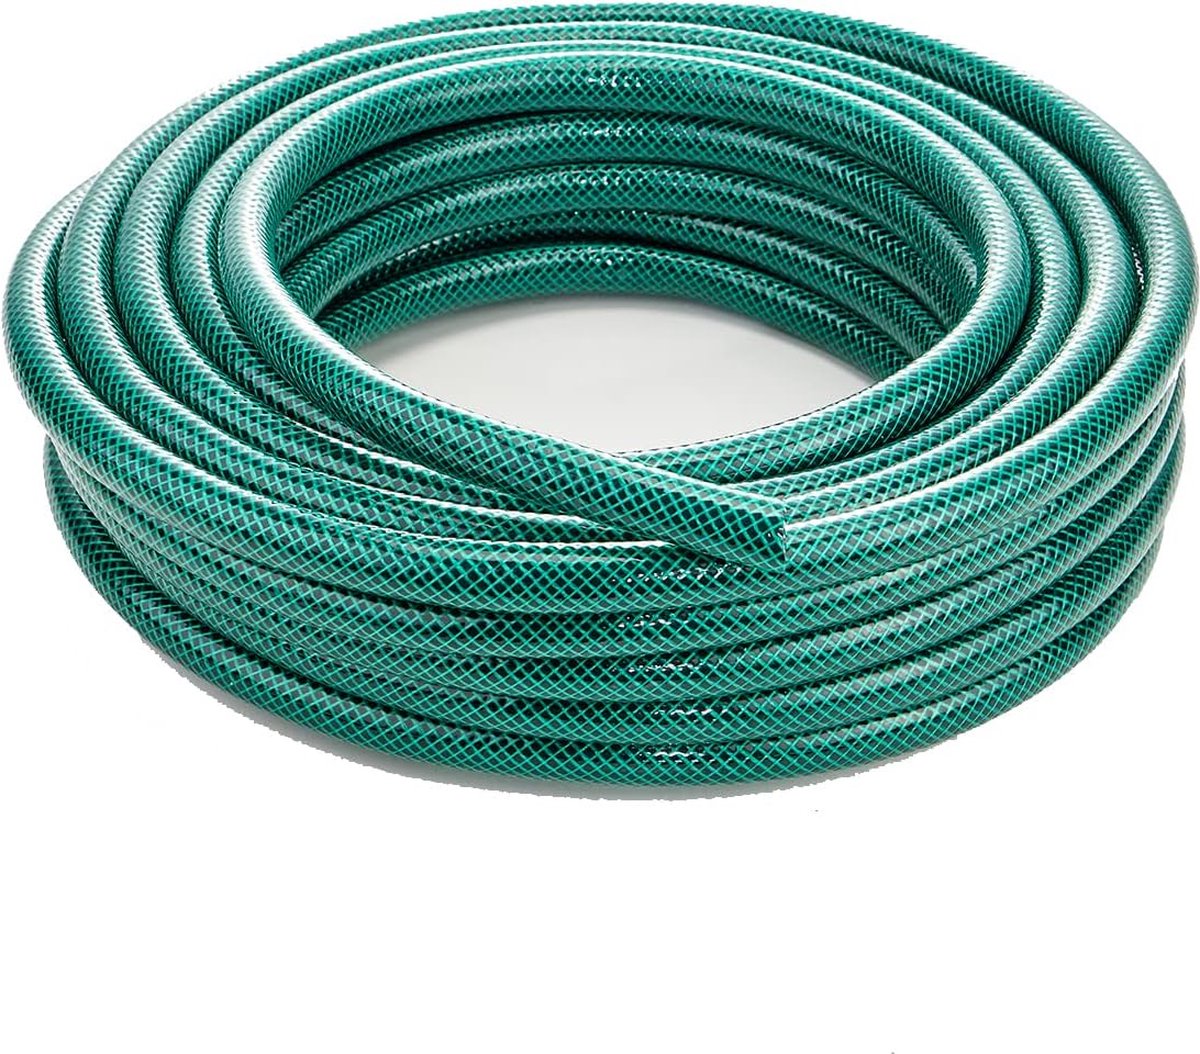 Garden Hose Outdoor ½ Hose for Lawns Boat Hose Flexible and Durable,Solid PVC Fitting for Household 15M/50FT